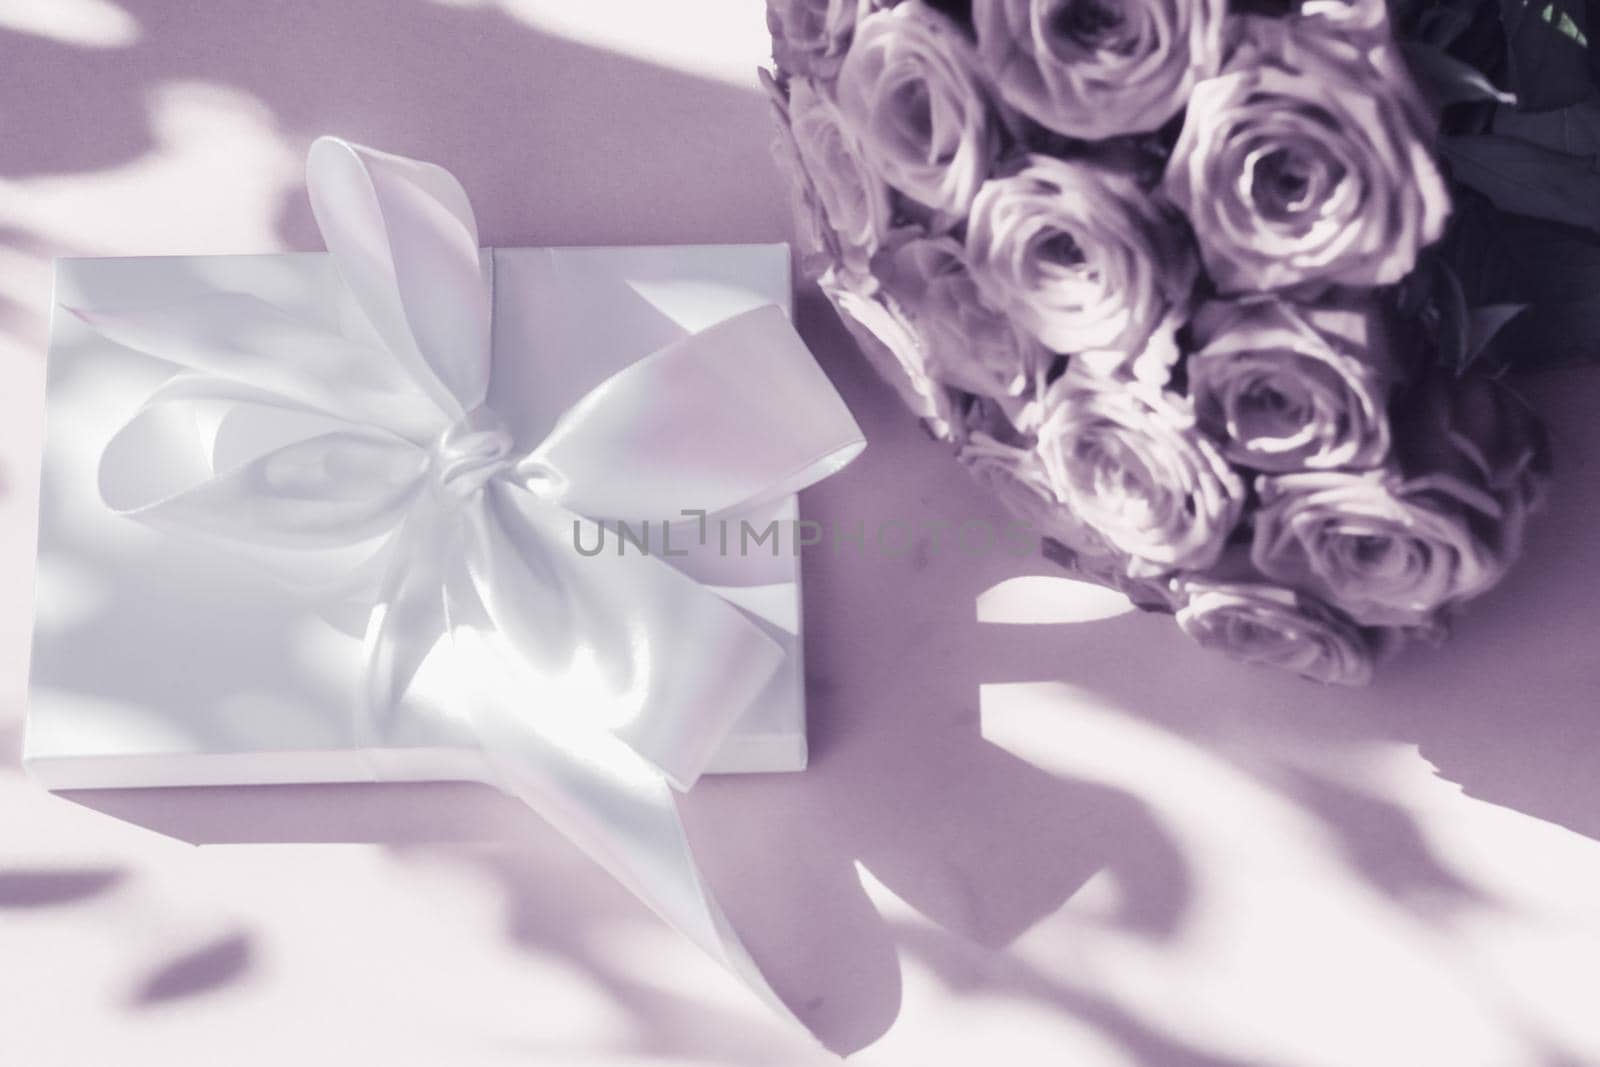 Luxury holiday silk gift box and bouquet of roses on purple background, romantic surprise and flowers as birthday or Valentines Day present by Anneleven